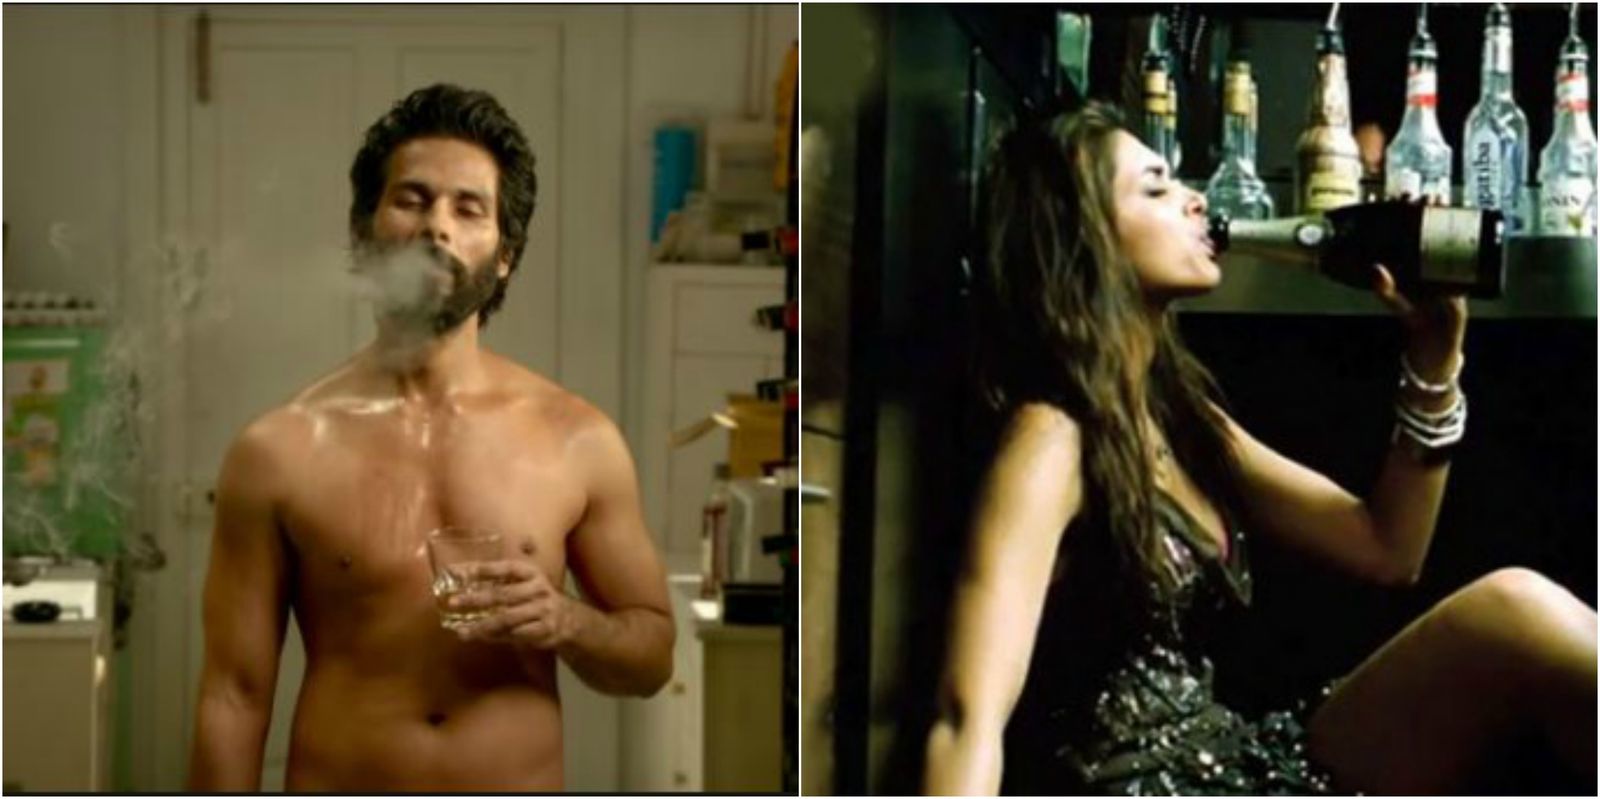 Bollywood Celebs Who Do Not Drink Or Smoke But Played Addicts On Screen Convincingly